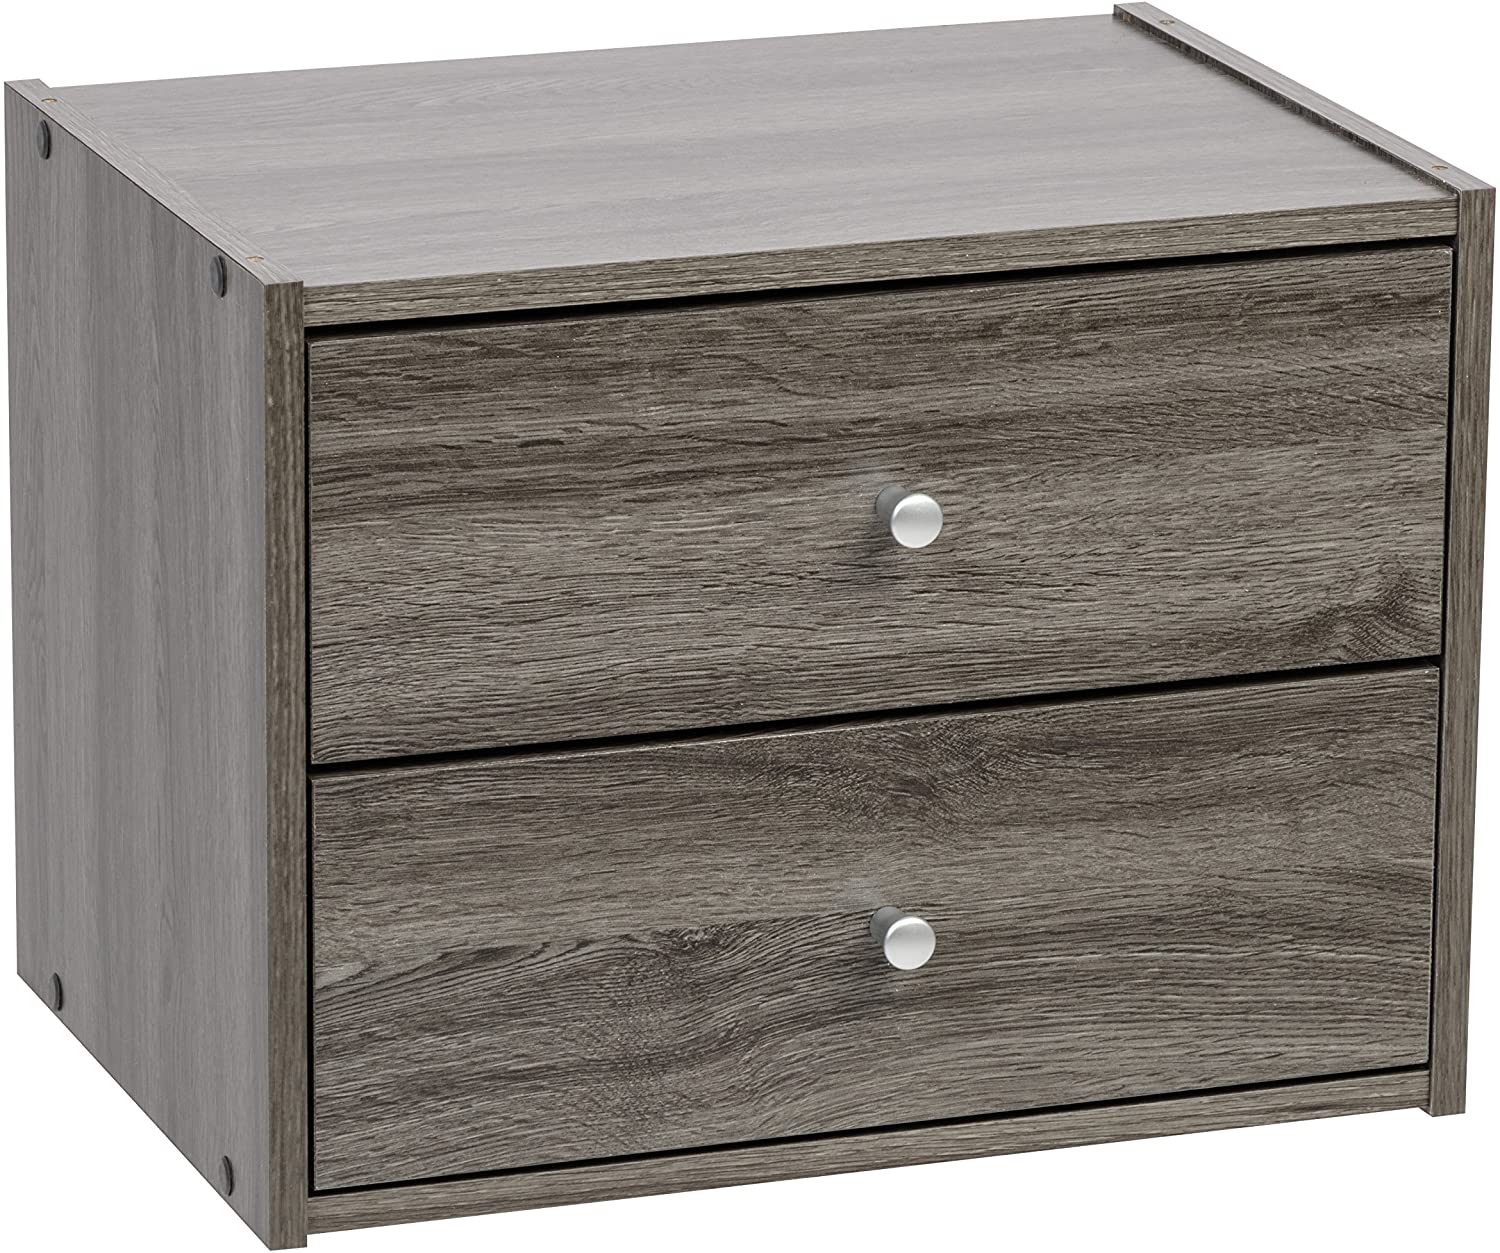 IRIS USA SBDR Modular Wood Stacking Small Chest of Drawers